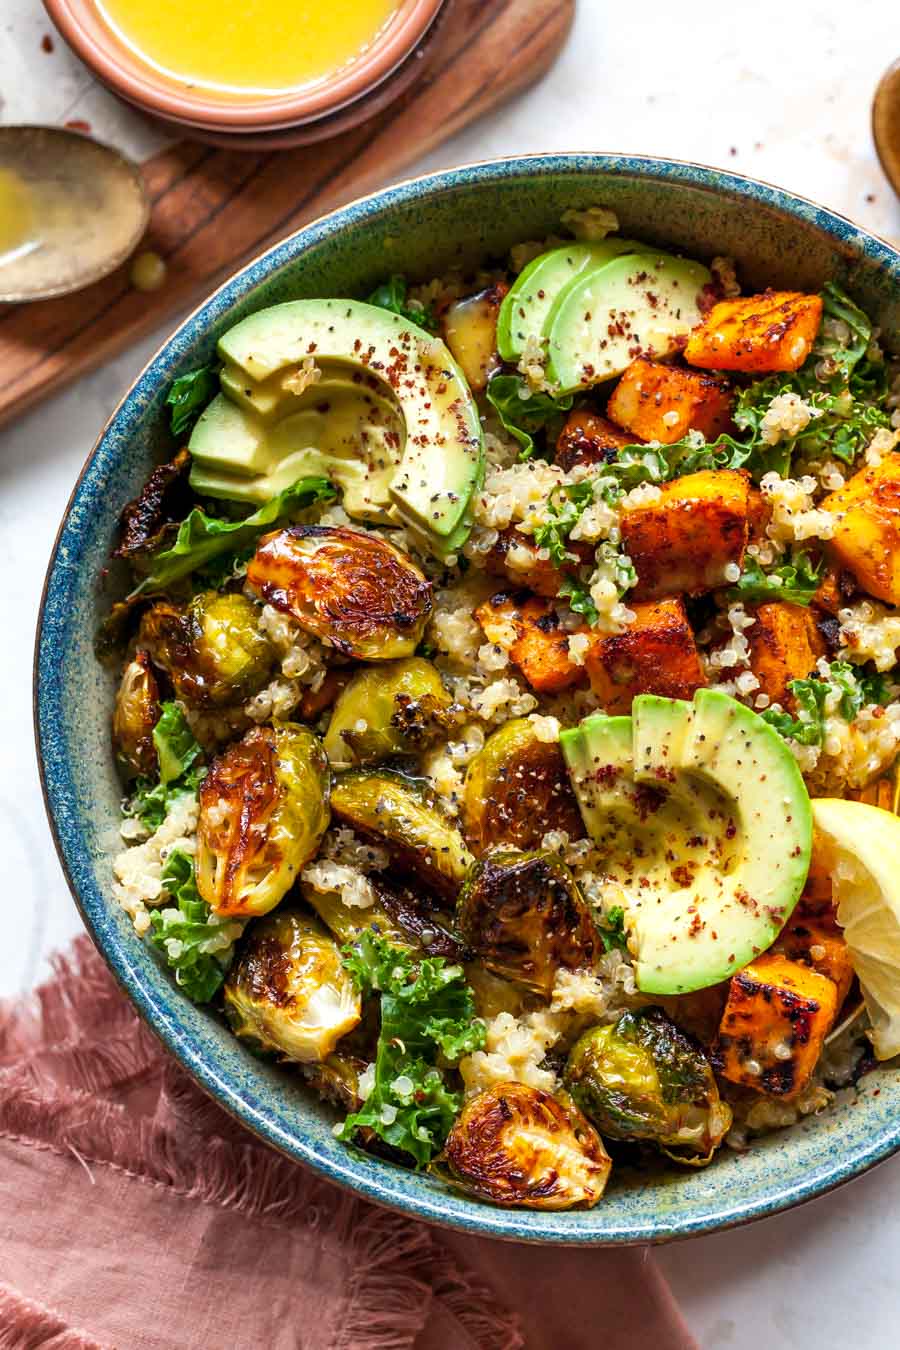 55 Best Vegetarian Meals Easy, Healthy Recipes to Try for Dinner Tonight